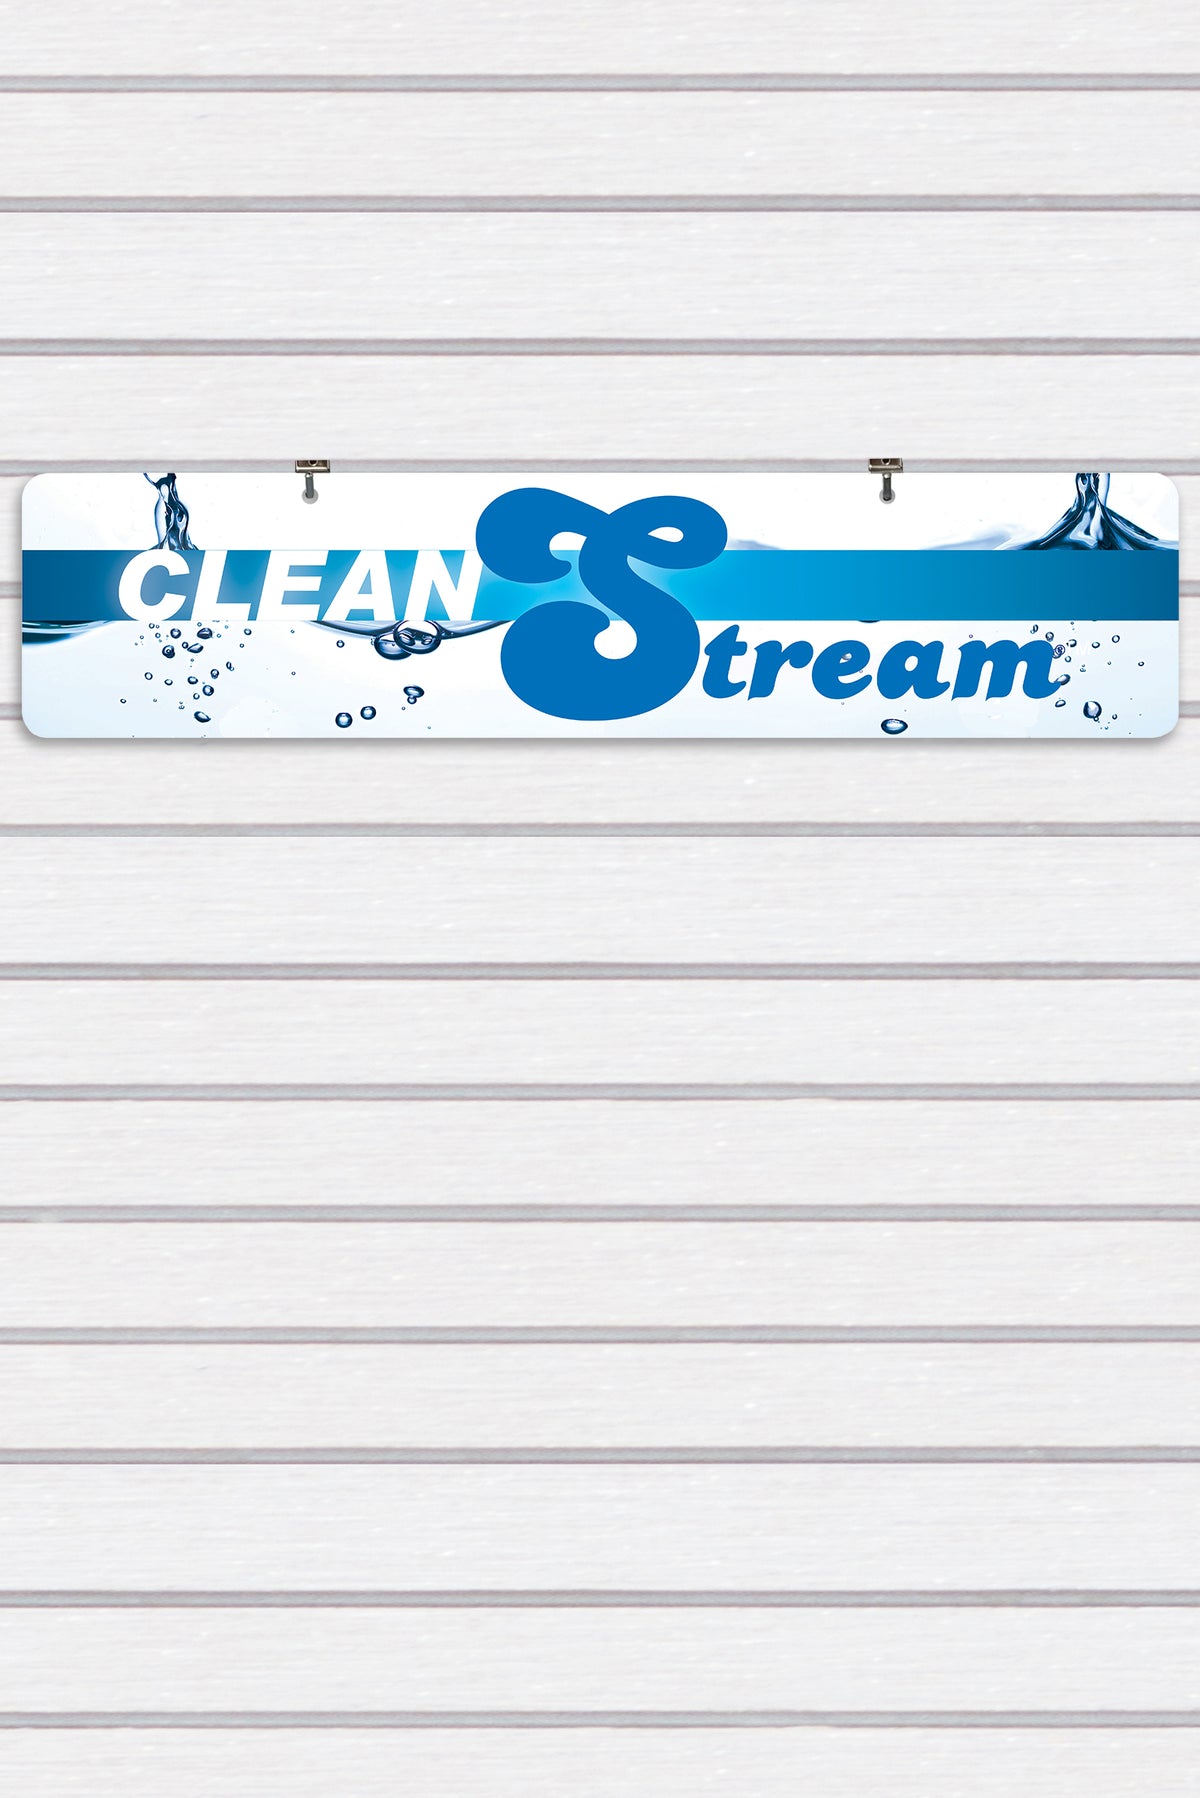 CleanStream Display Sign